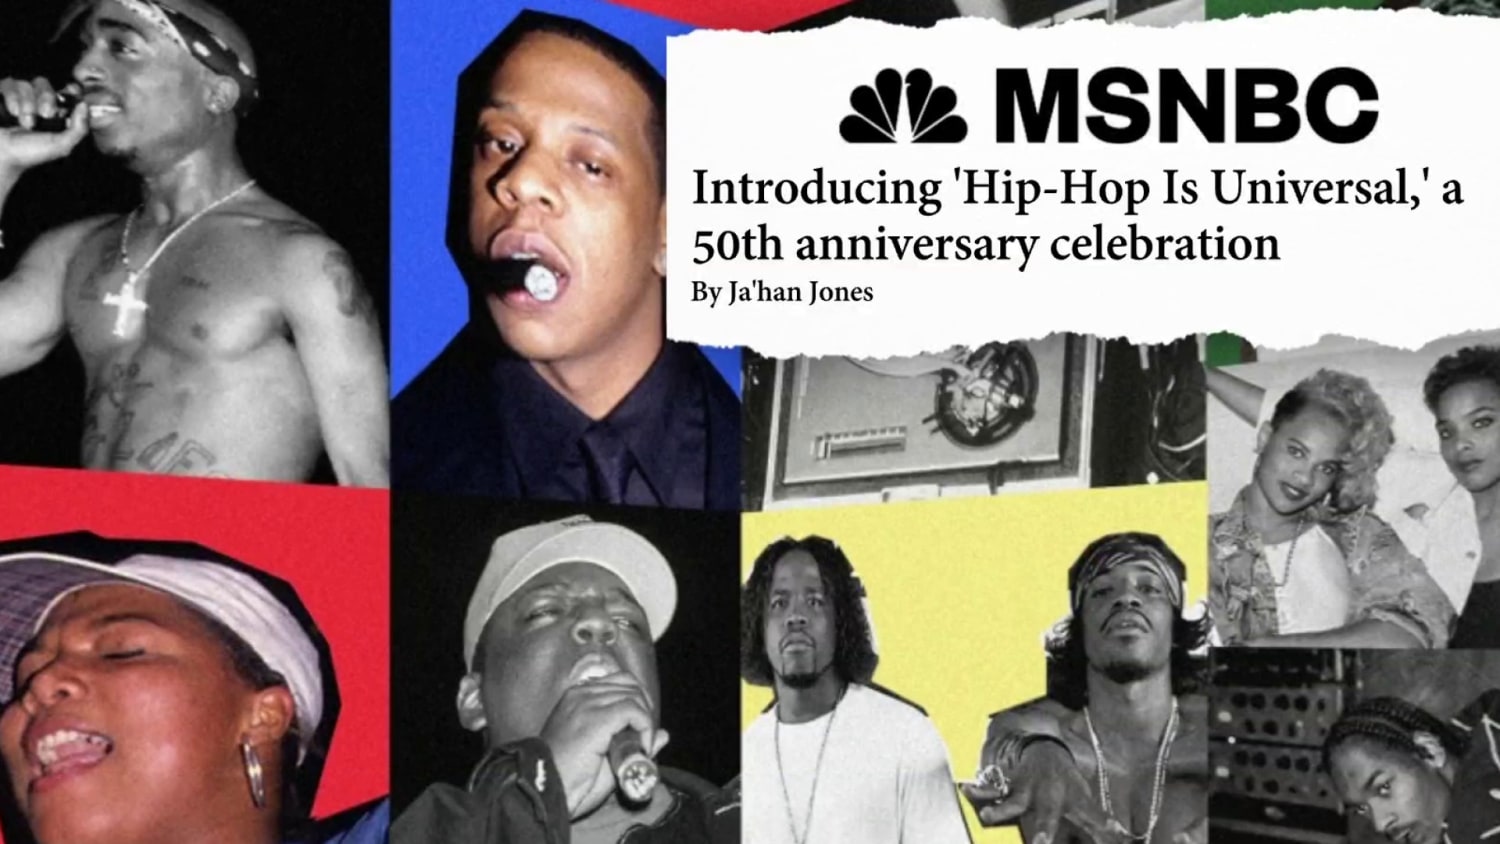 The 50 Greatest Hip Hop Samples of All Time, News